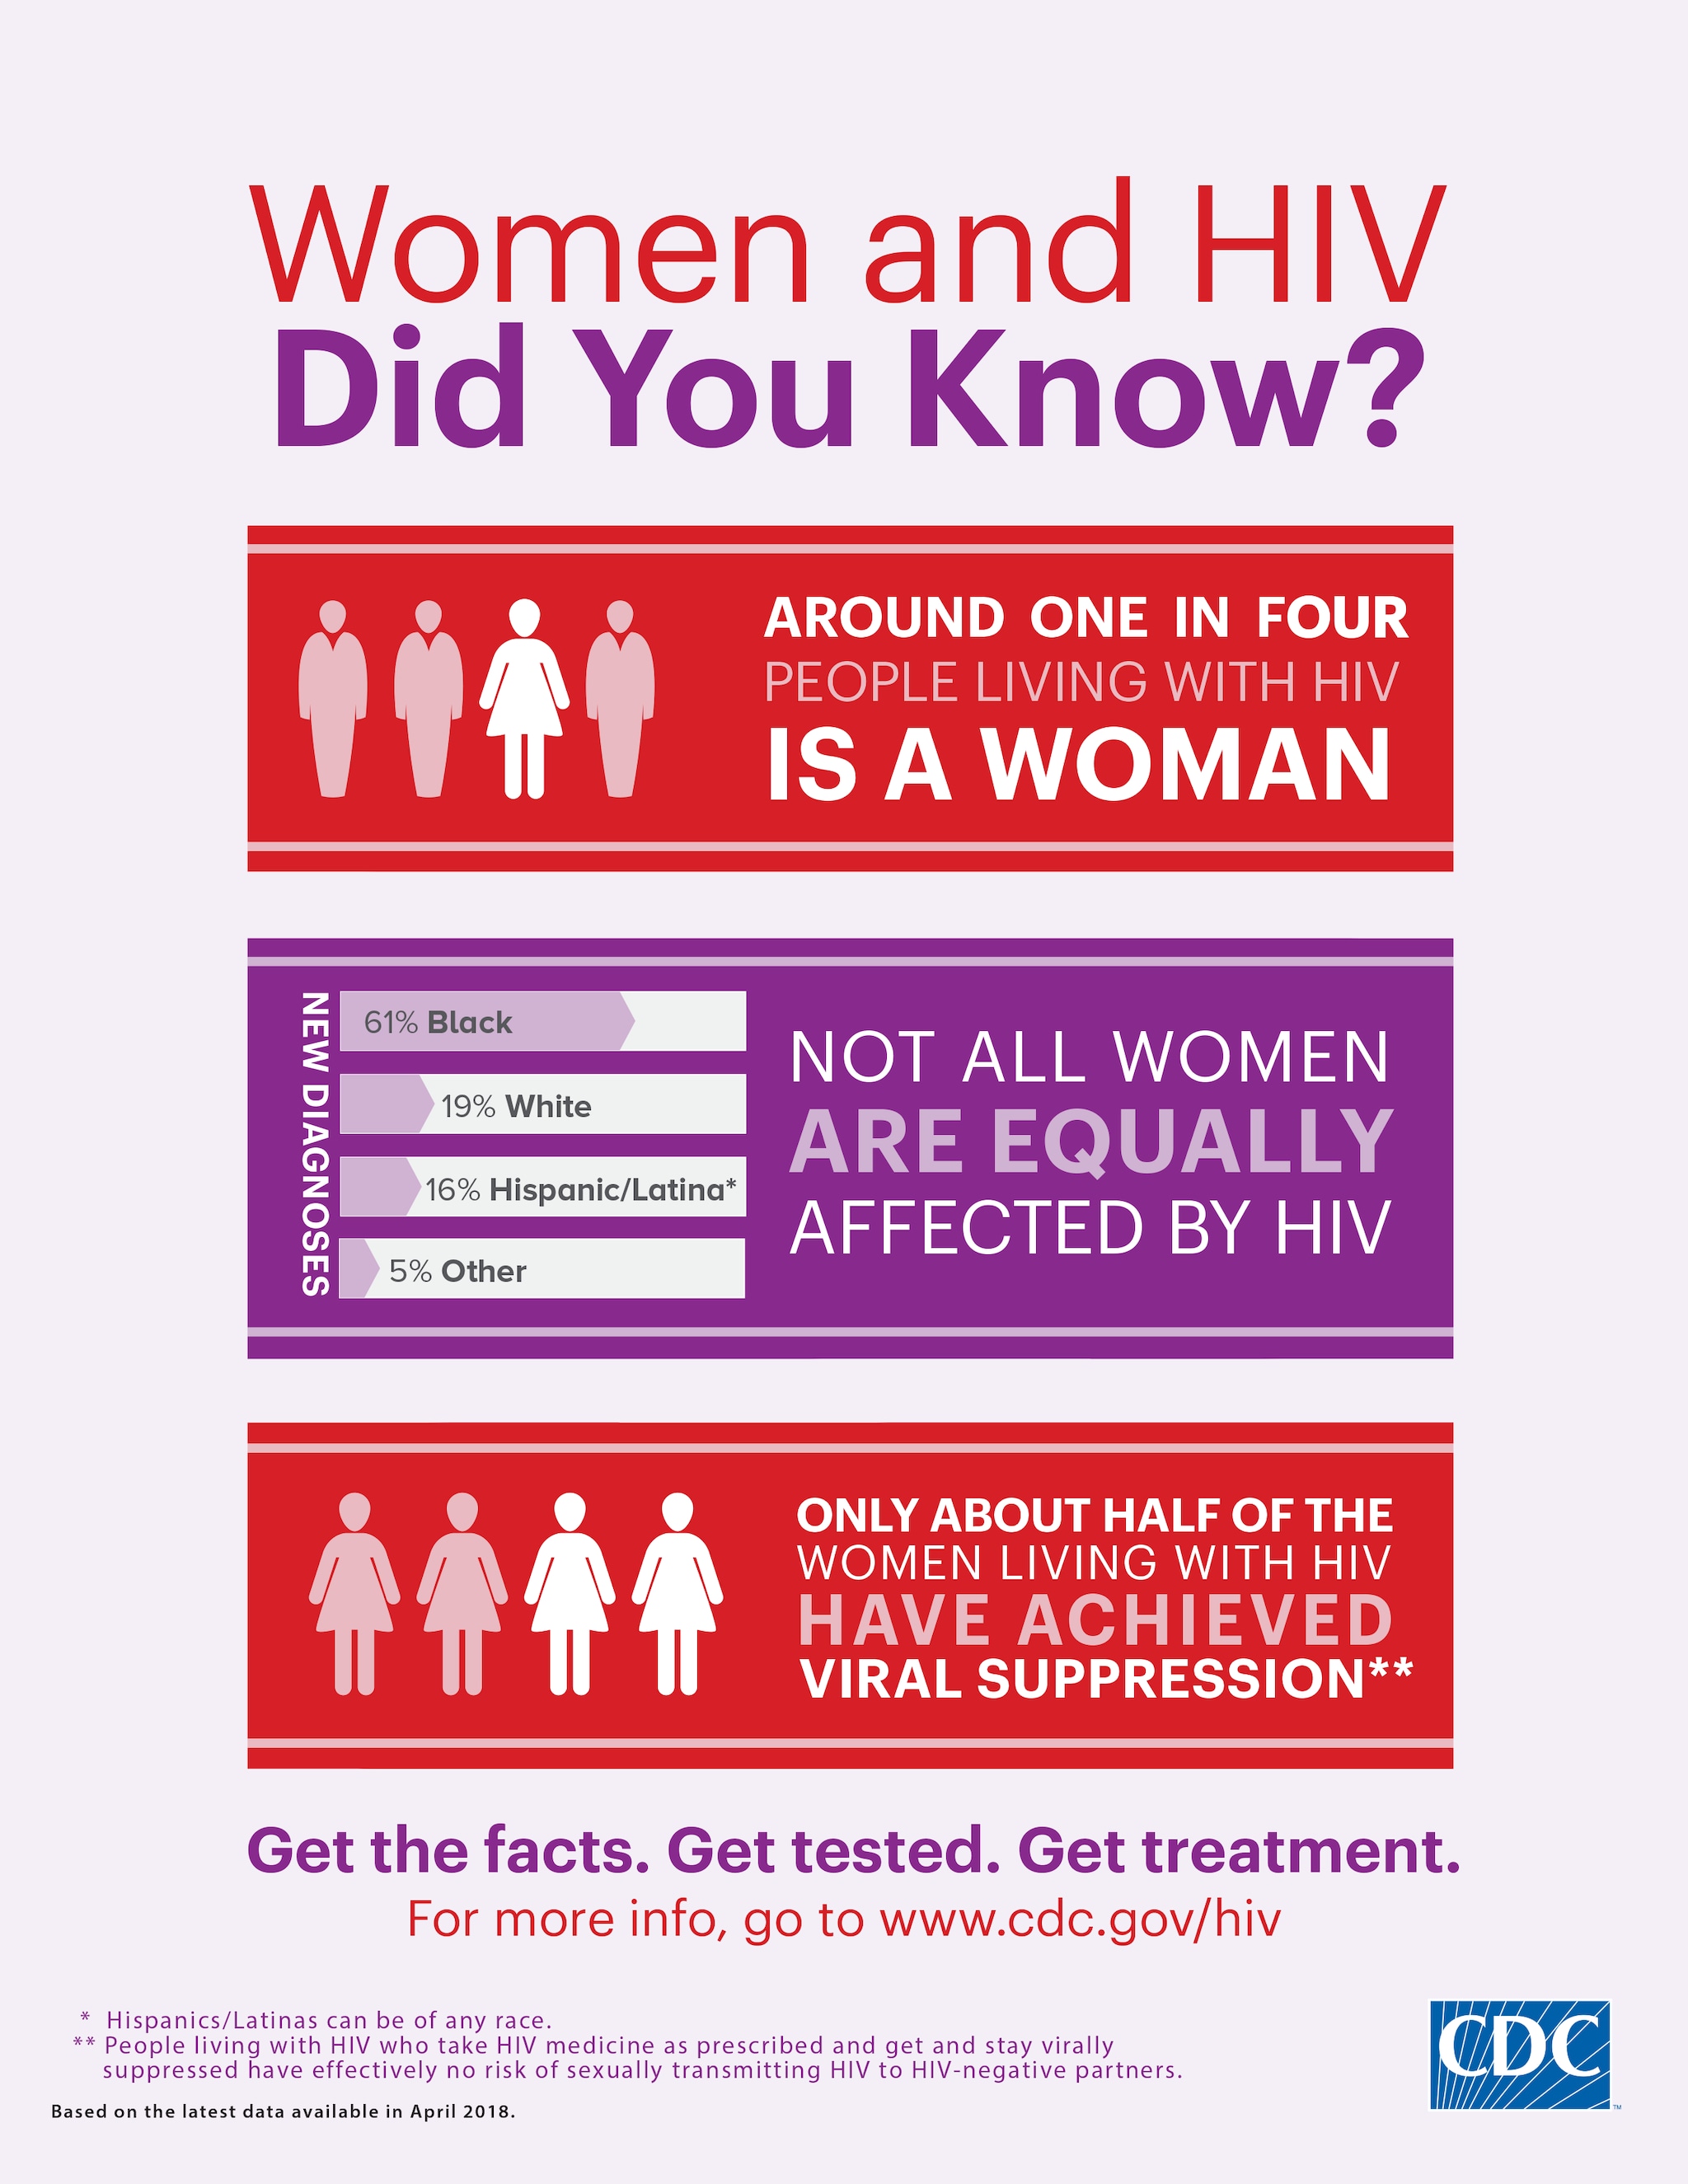 Herenciageneticayenfermedad Infographics And Posters Resource Library Hivaids Cdc